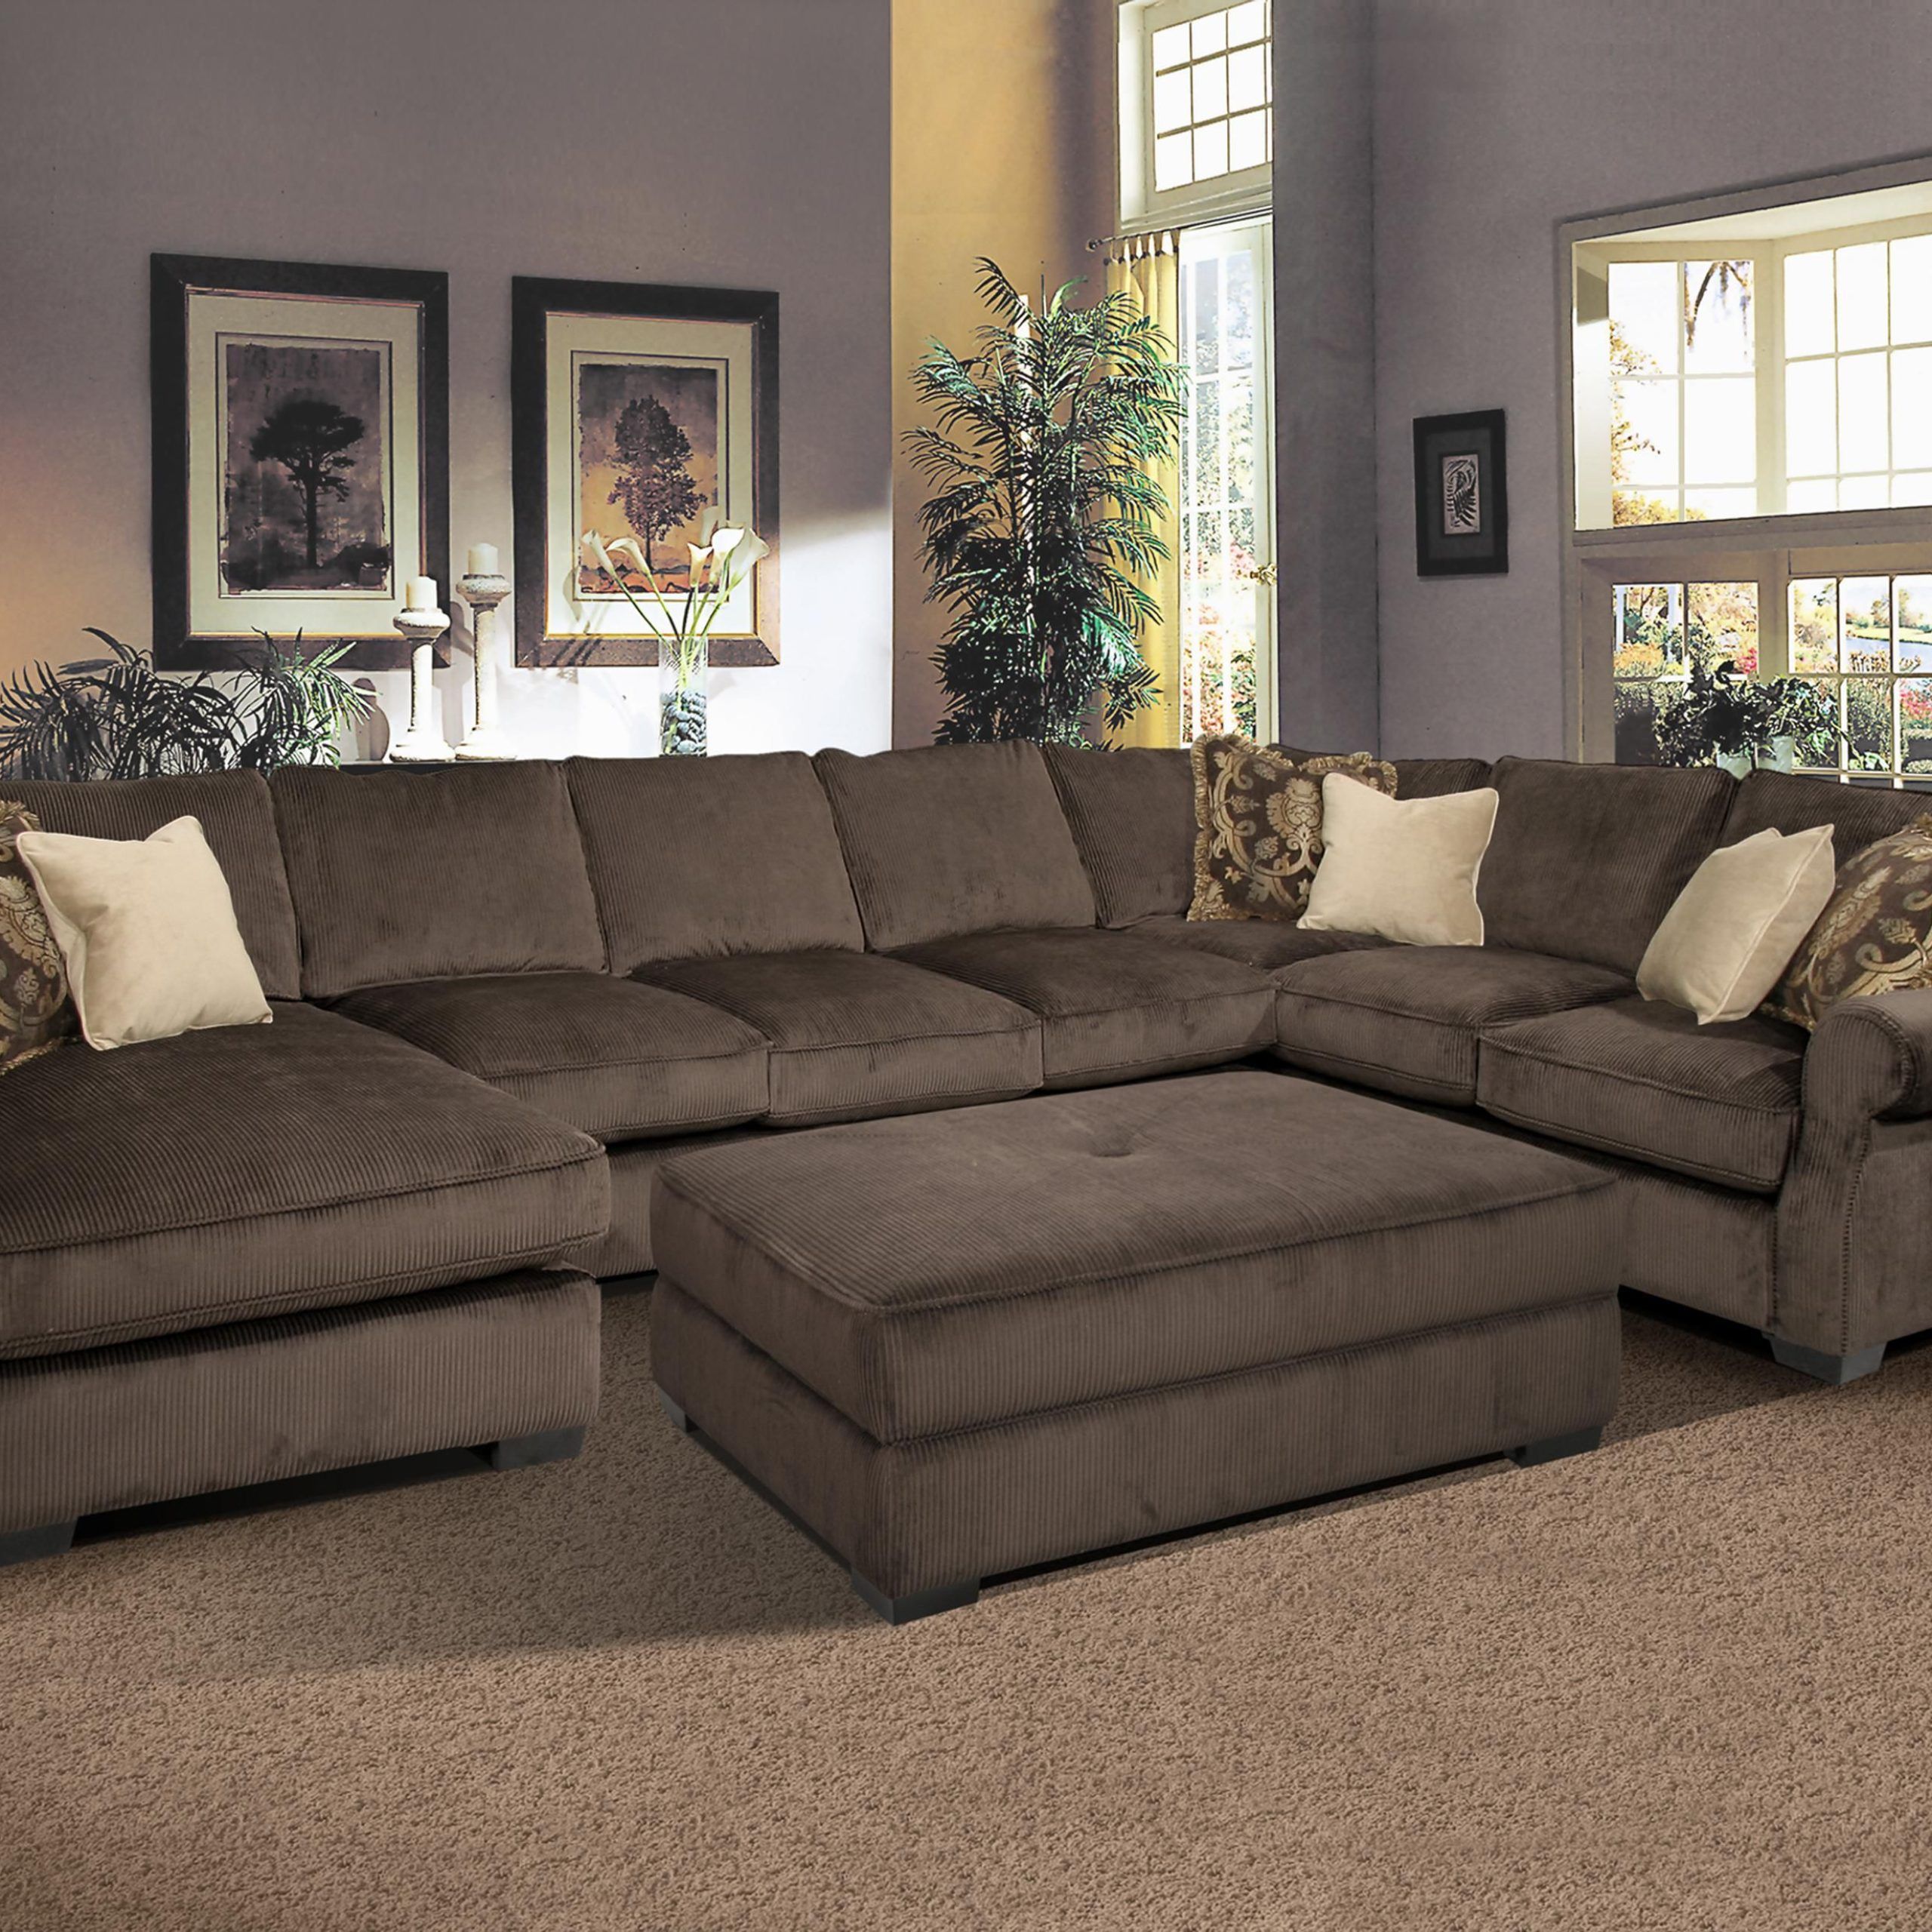 Furniture Elliot Fabric Microfiber 3 Piece Chaise Sectional Sofa In Microfiber Sectional Corner Sofas (View 9 of 20)